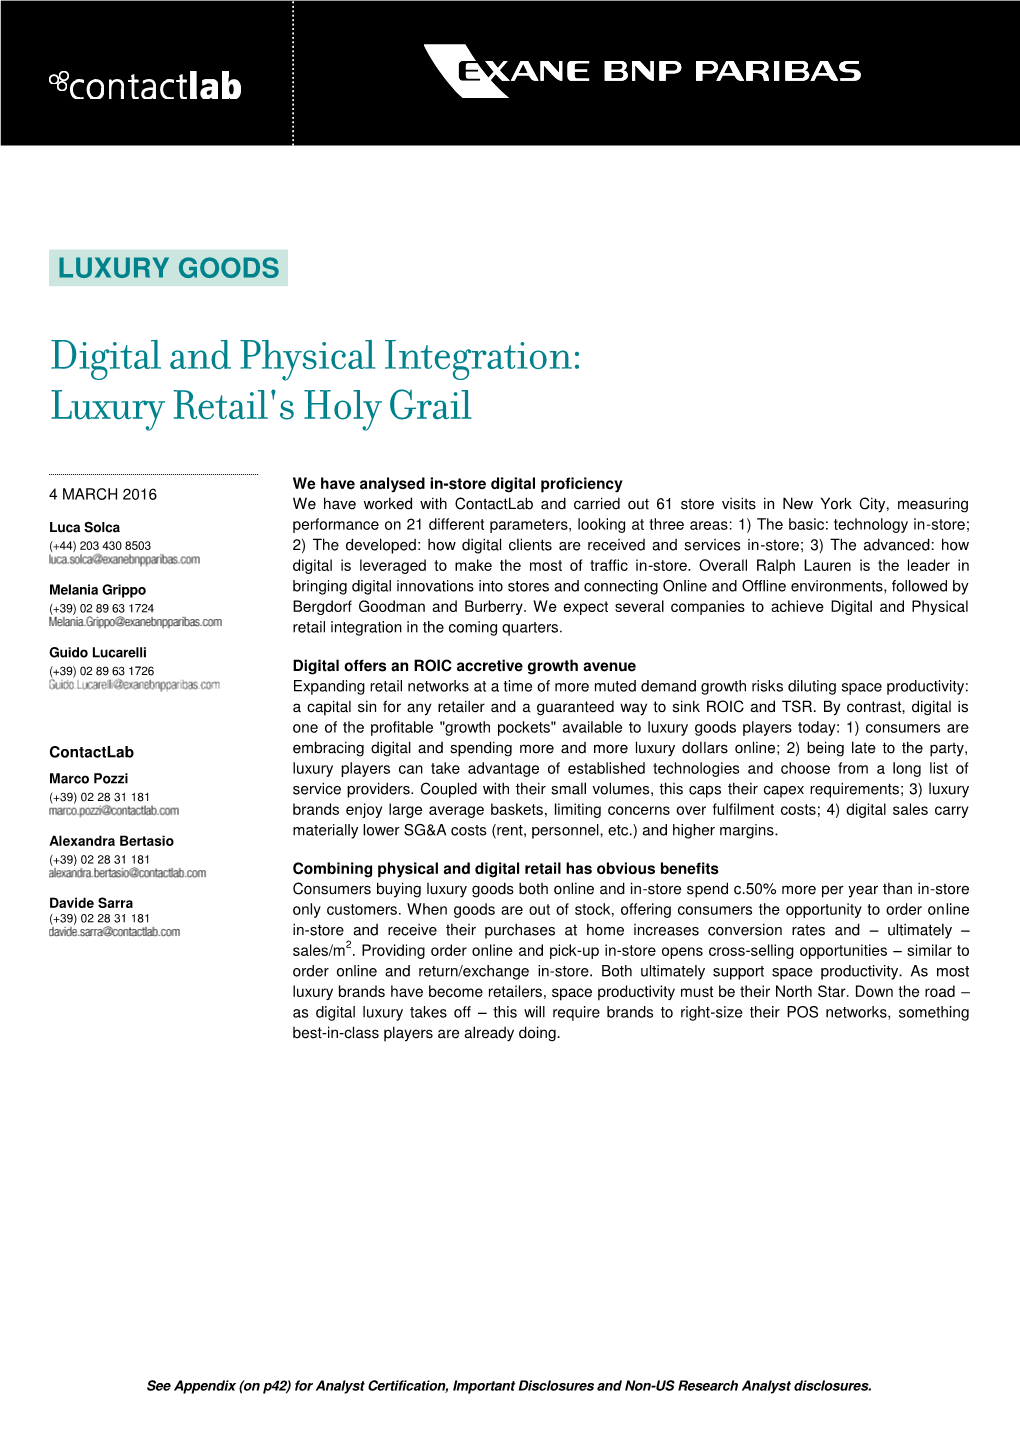 Digital and Physical Integration: Luxury Retail's Holy Grail